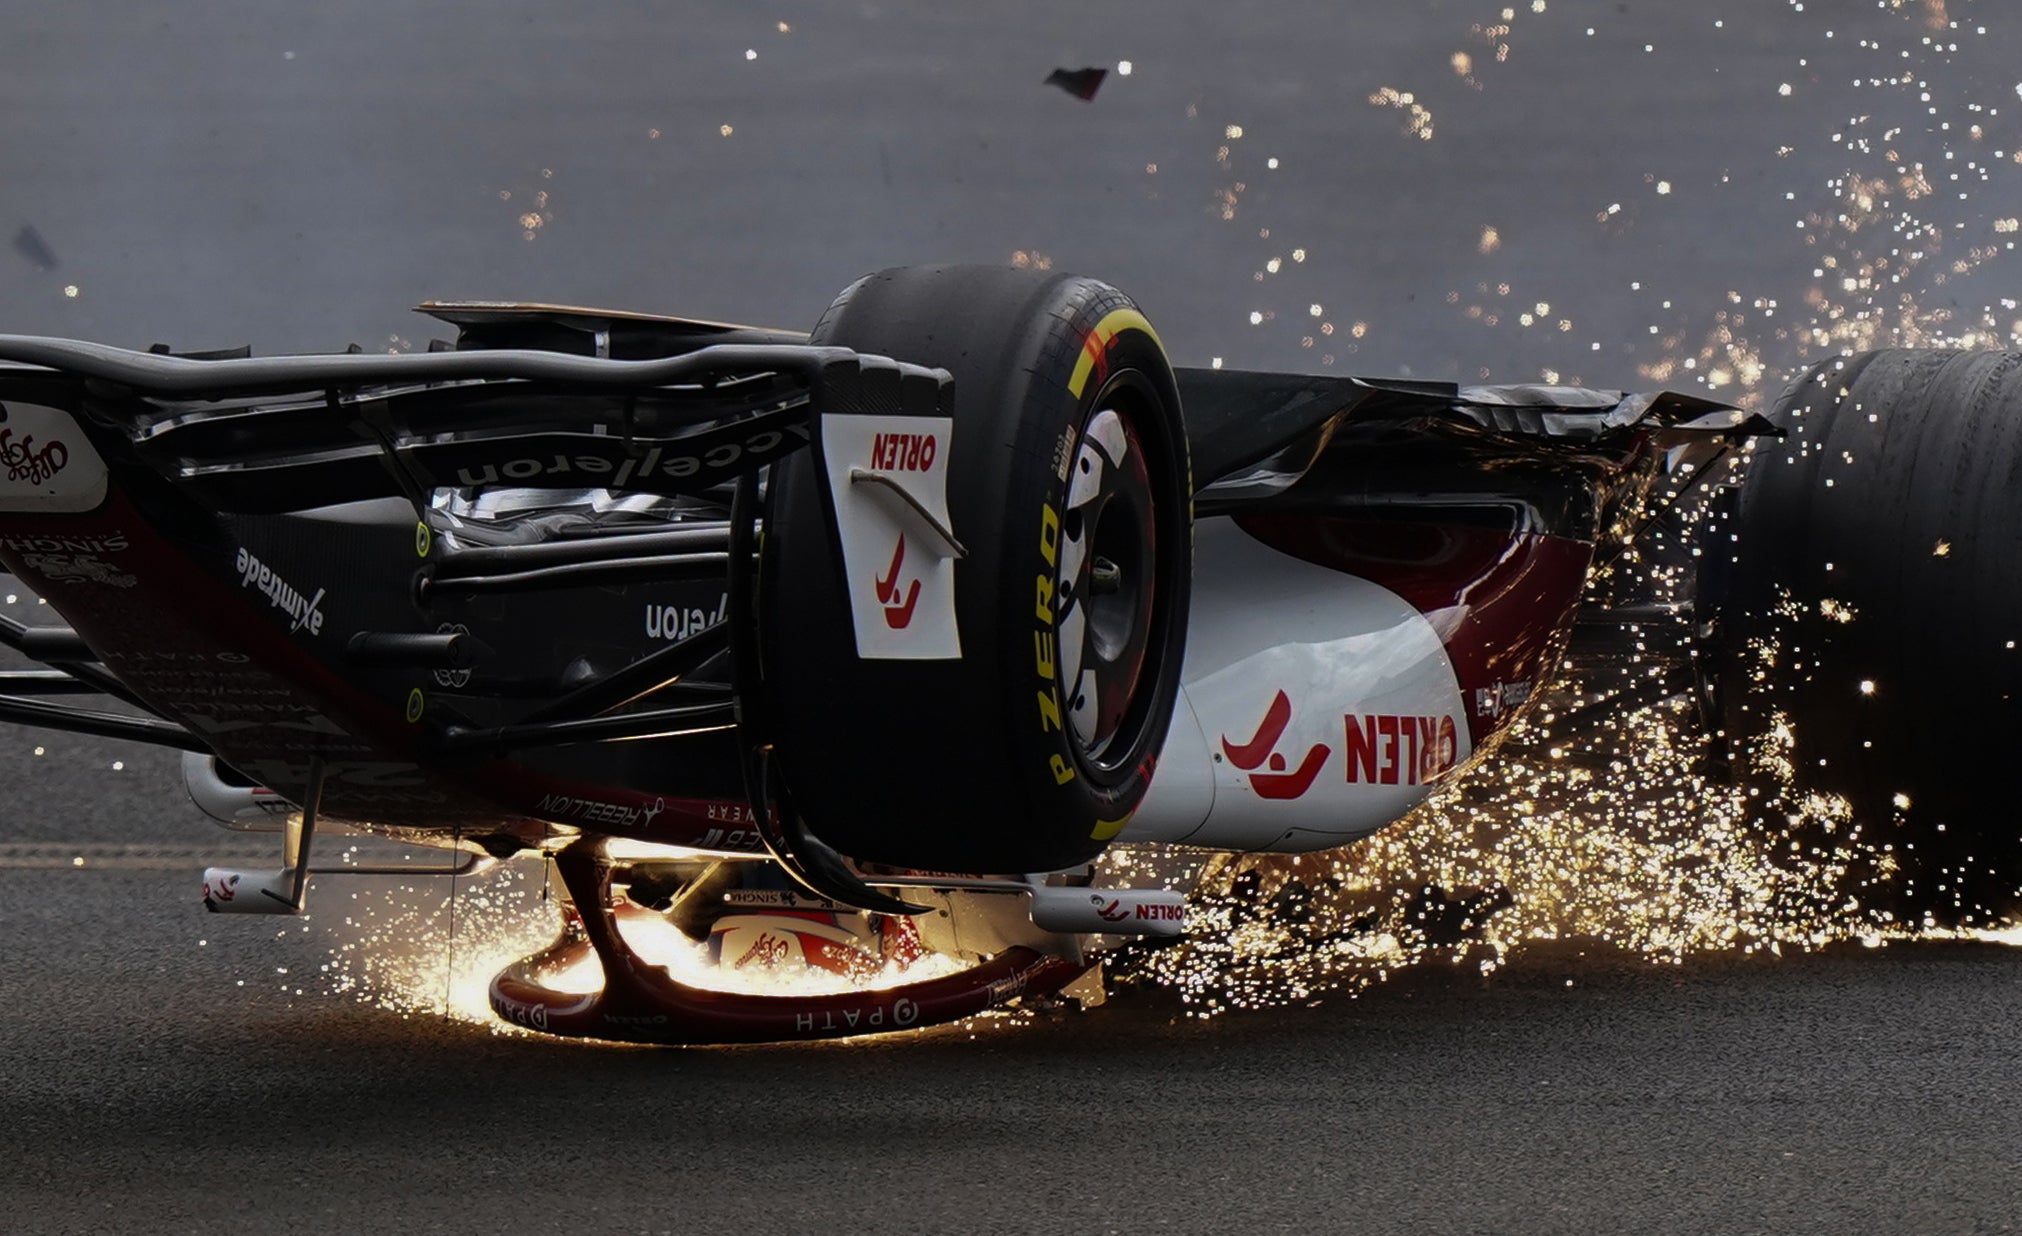 Alfa Romeo’s Zhou Guanyu slides towards the barrier after a collision at the start of the British Grand Prix (Tim Goode/PA)